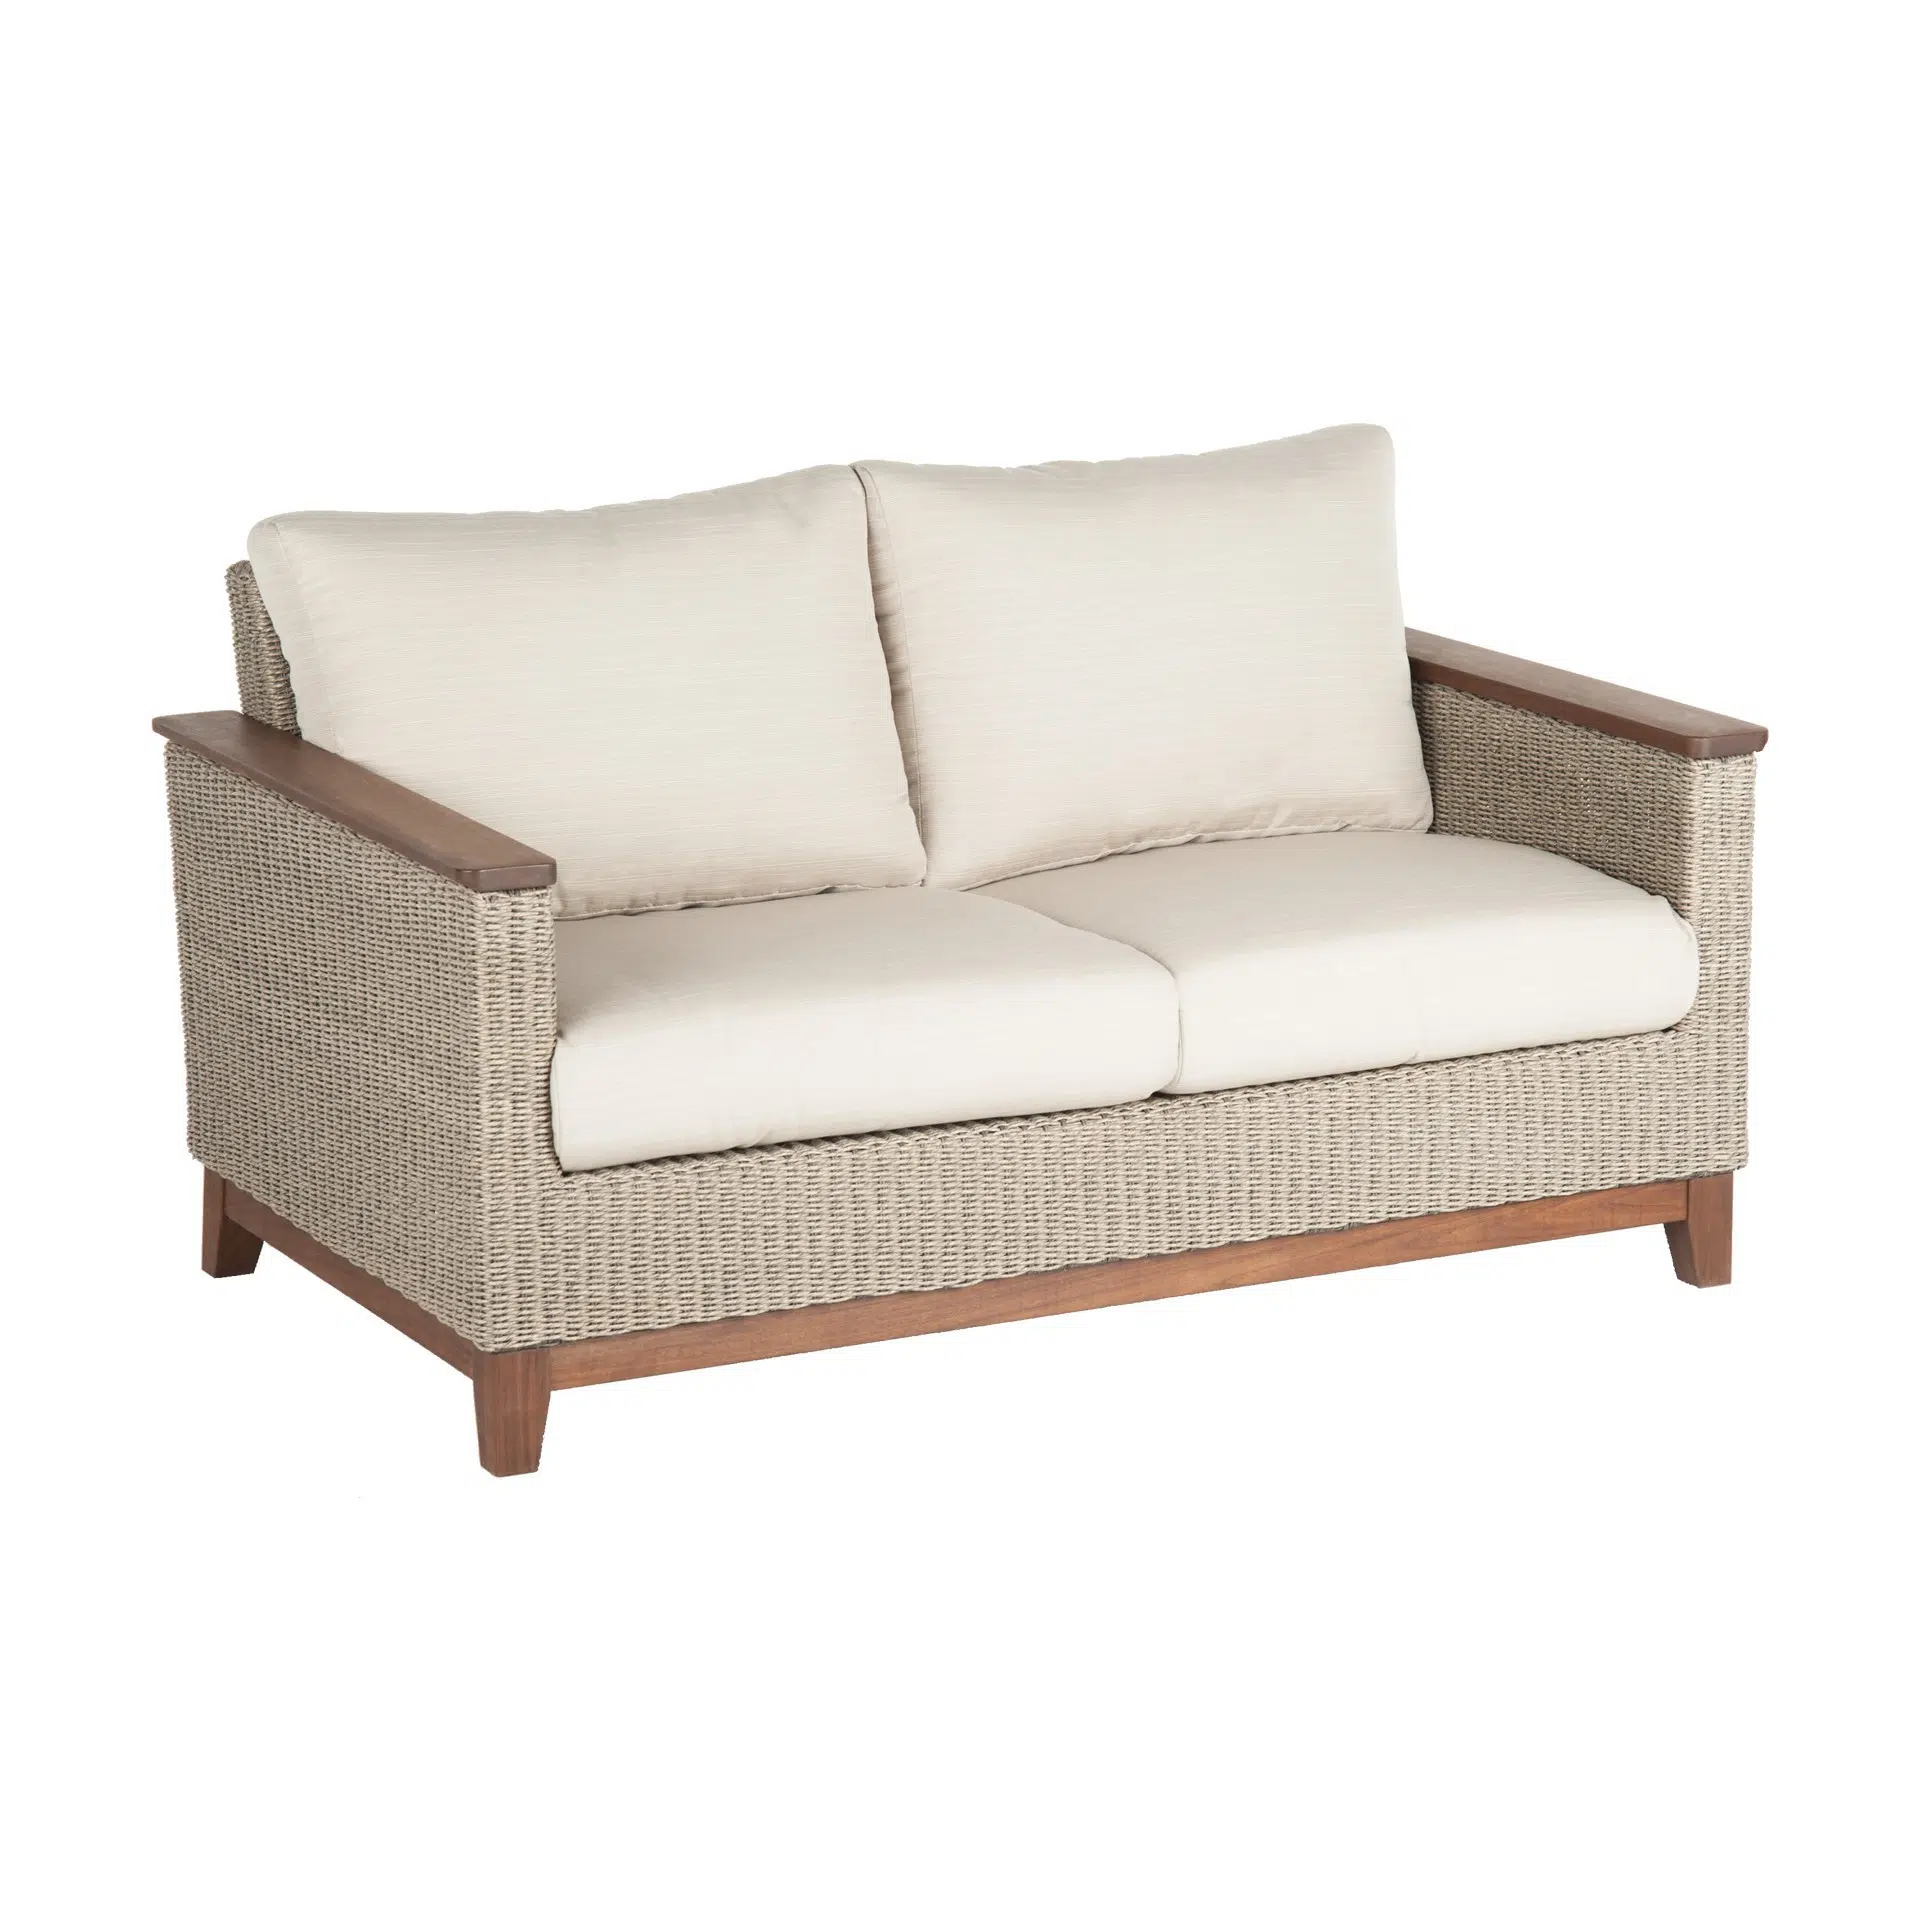 Coral loveseat natural luxury outdoor living by hausers patio